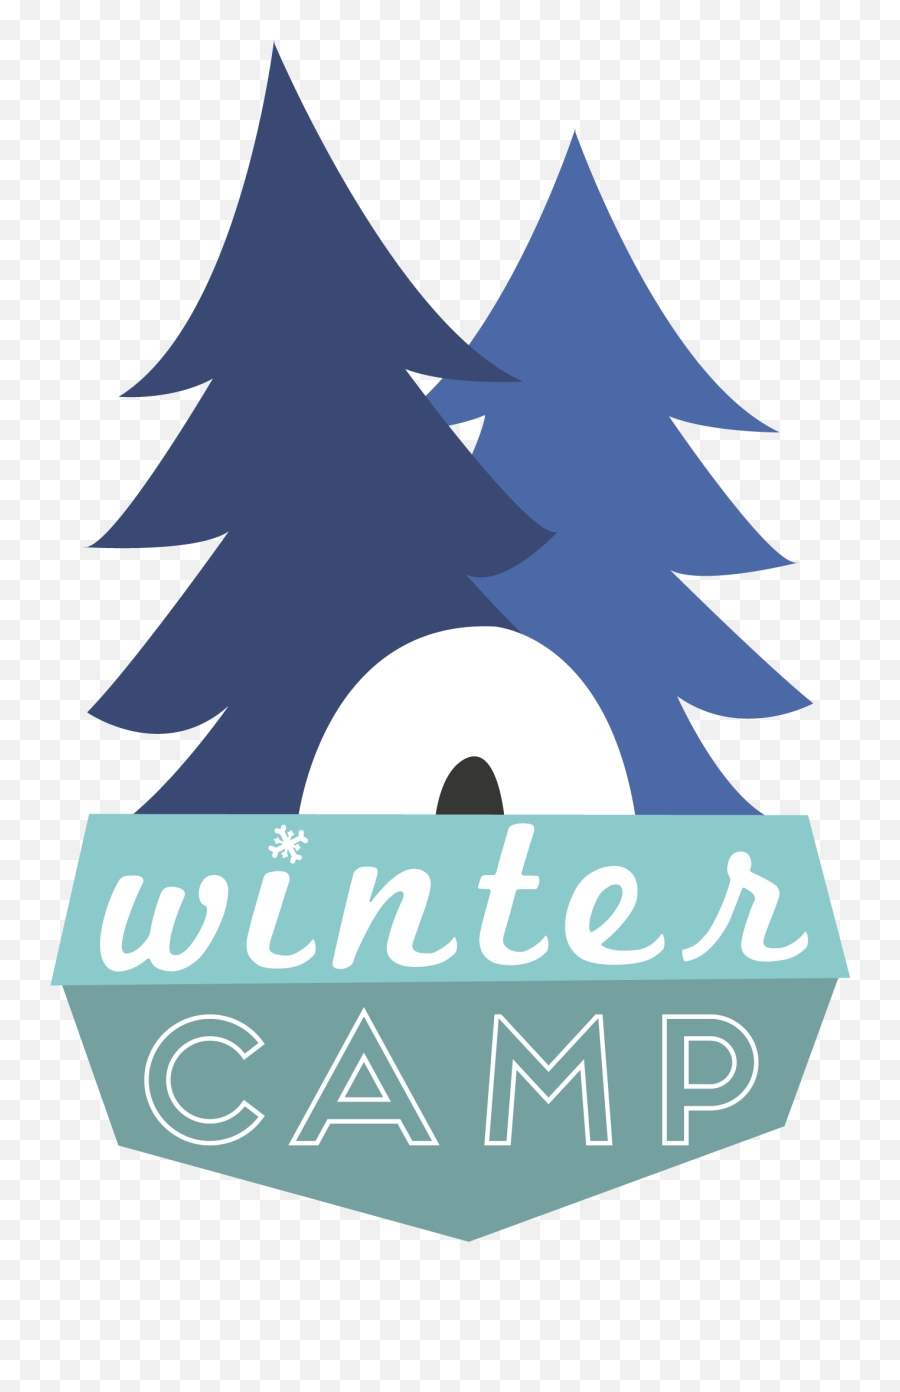 Winter Camp Phillips - Scoutsbsa Camp Fort Rice Bsa Winter Camp Png,Cub Scout Logo Vector